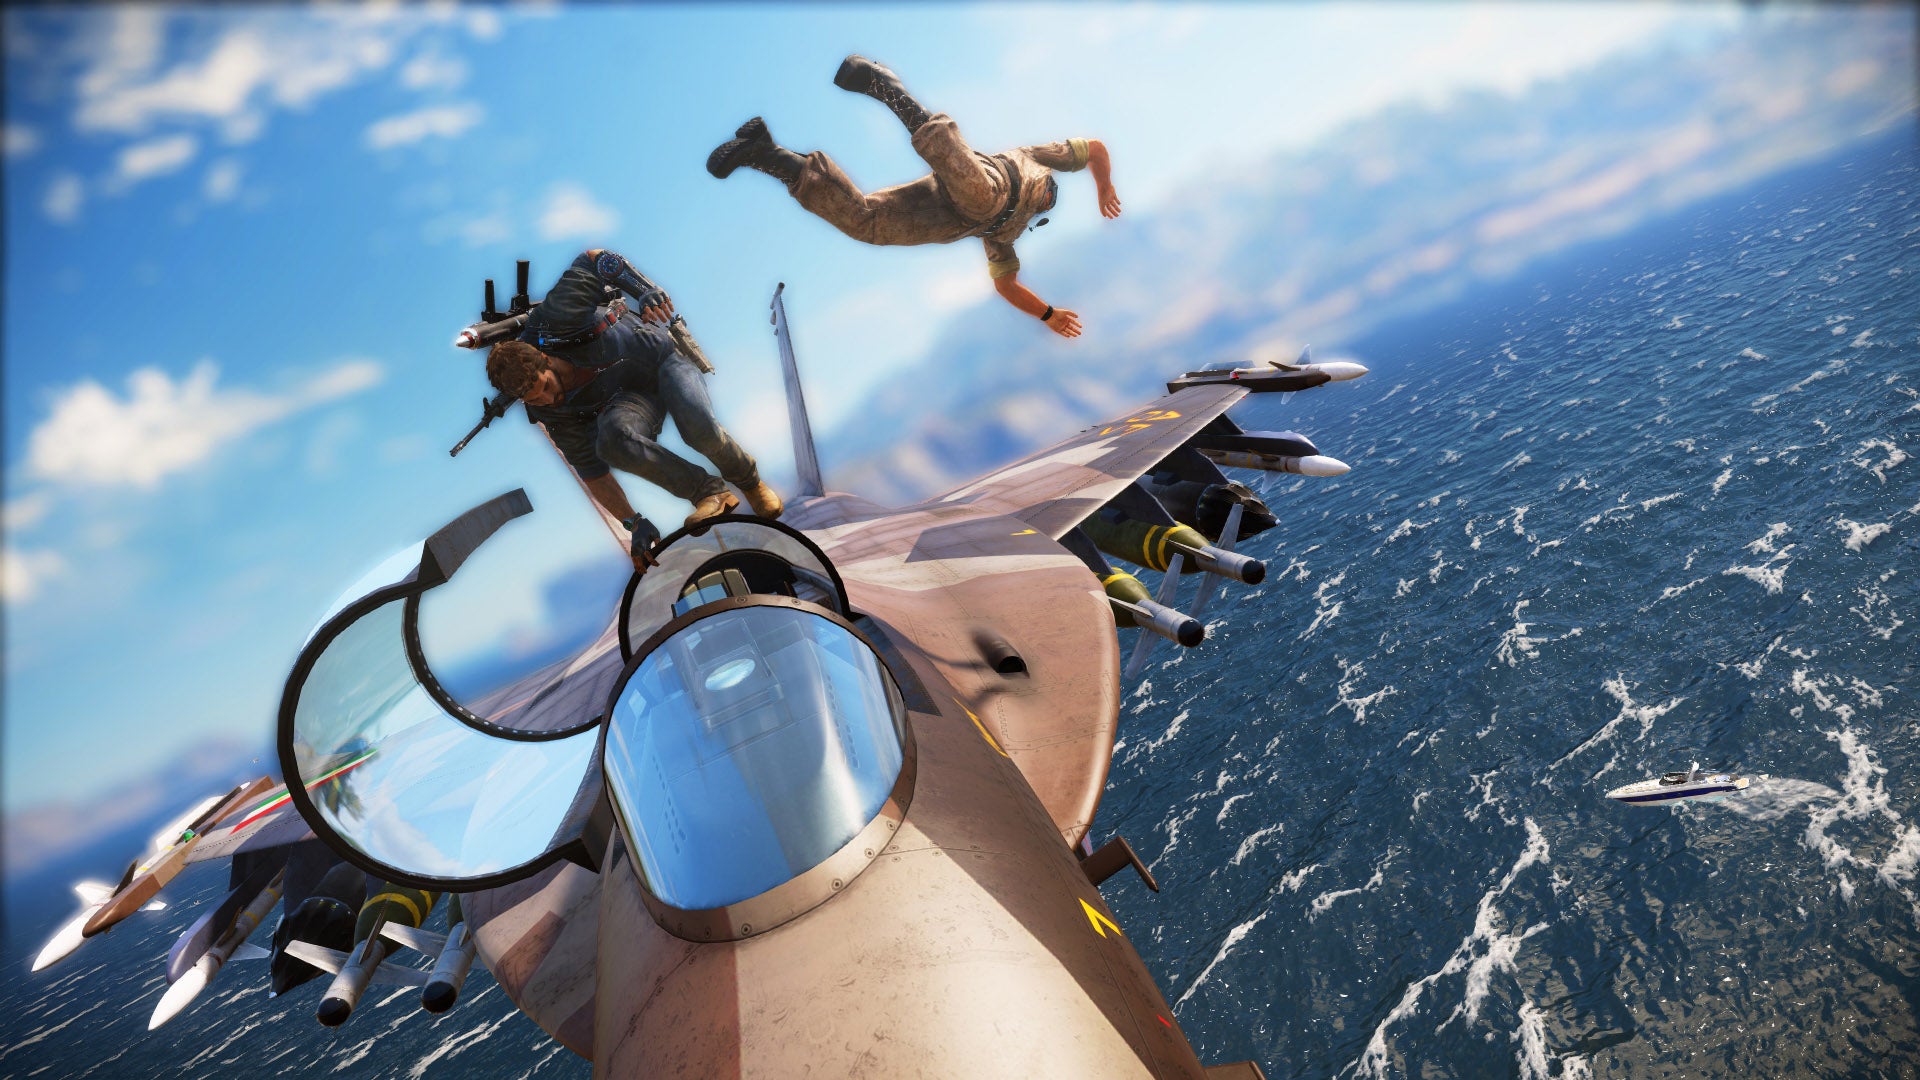 Has Just Cause 3 Gone Too Hardcore For Regular Players Vg247